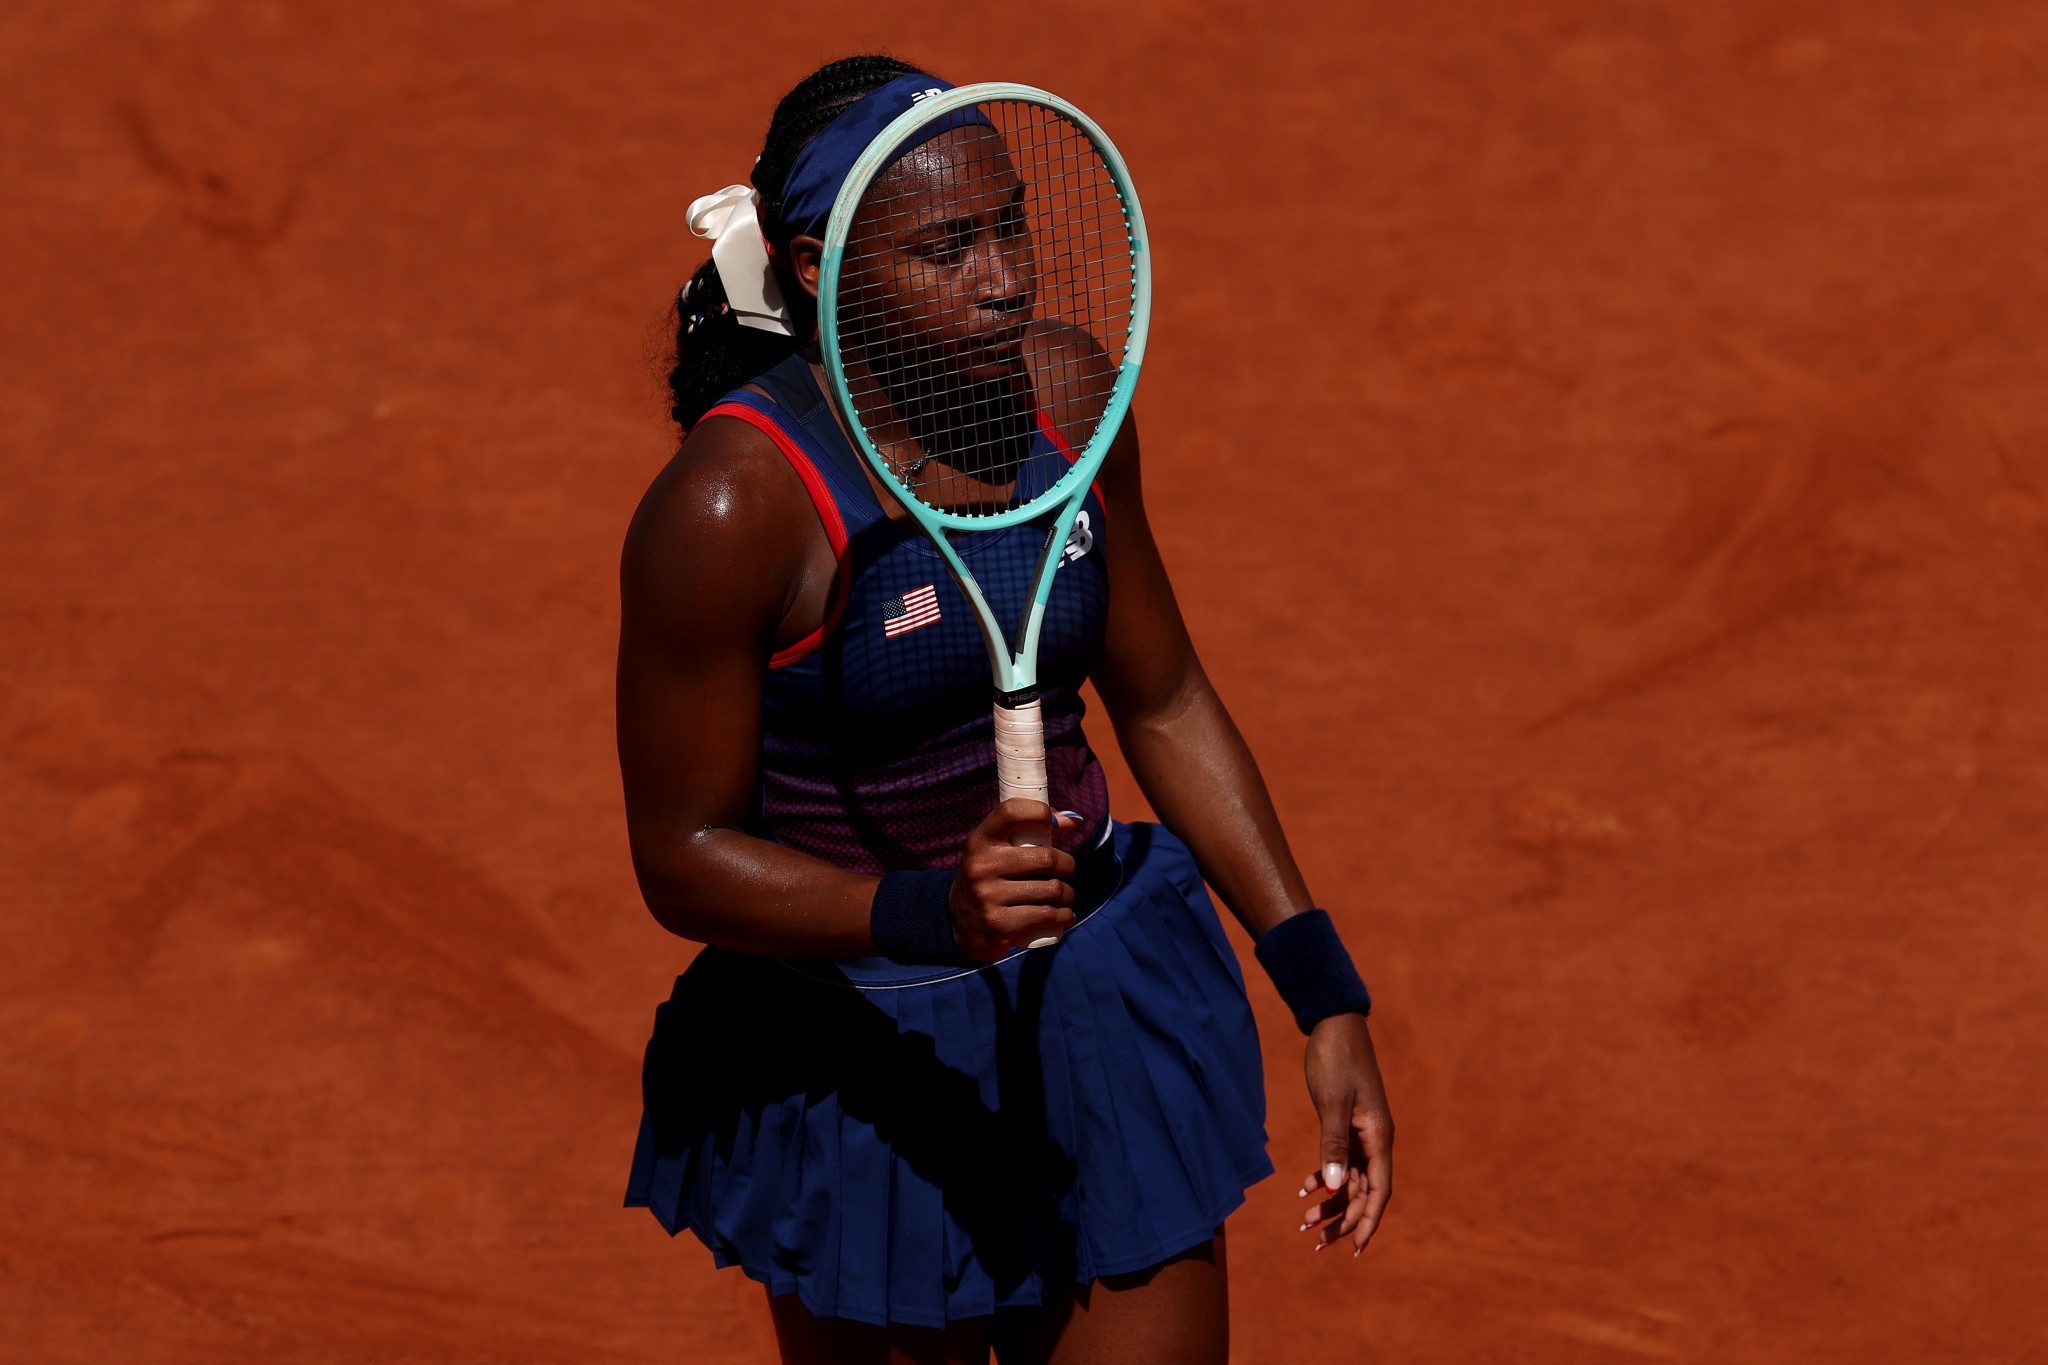 It will be no gold for Coco Gauff after her women's singles defeat. GETTY IMAGES